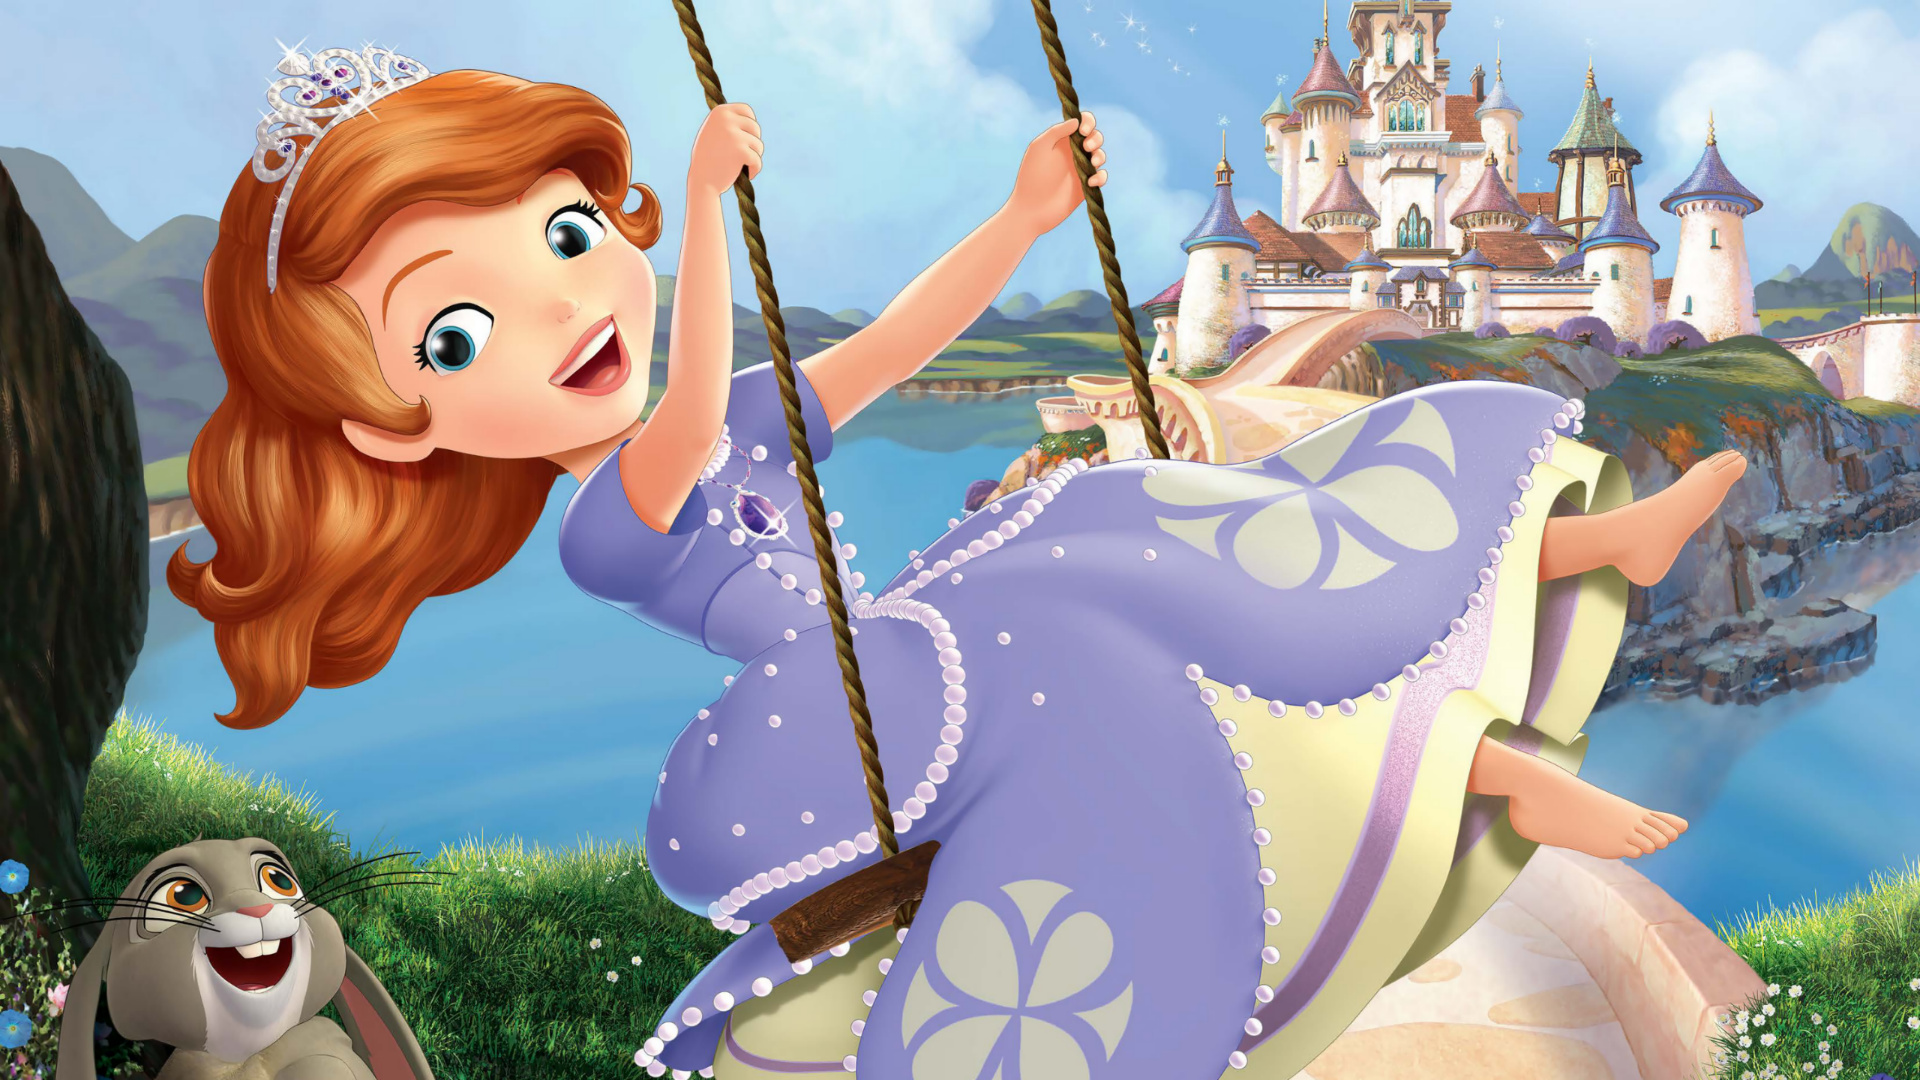 Sofia The First Series